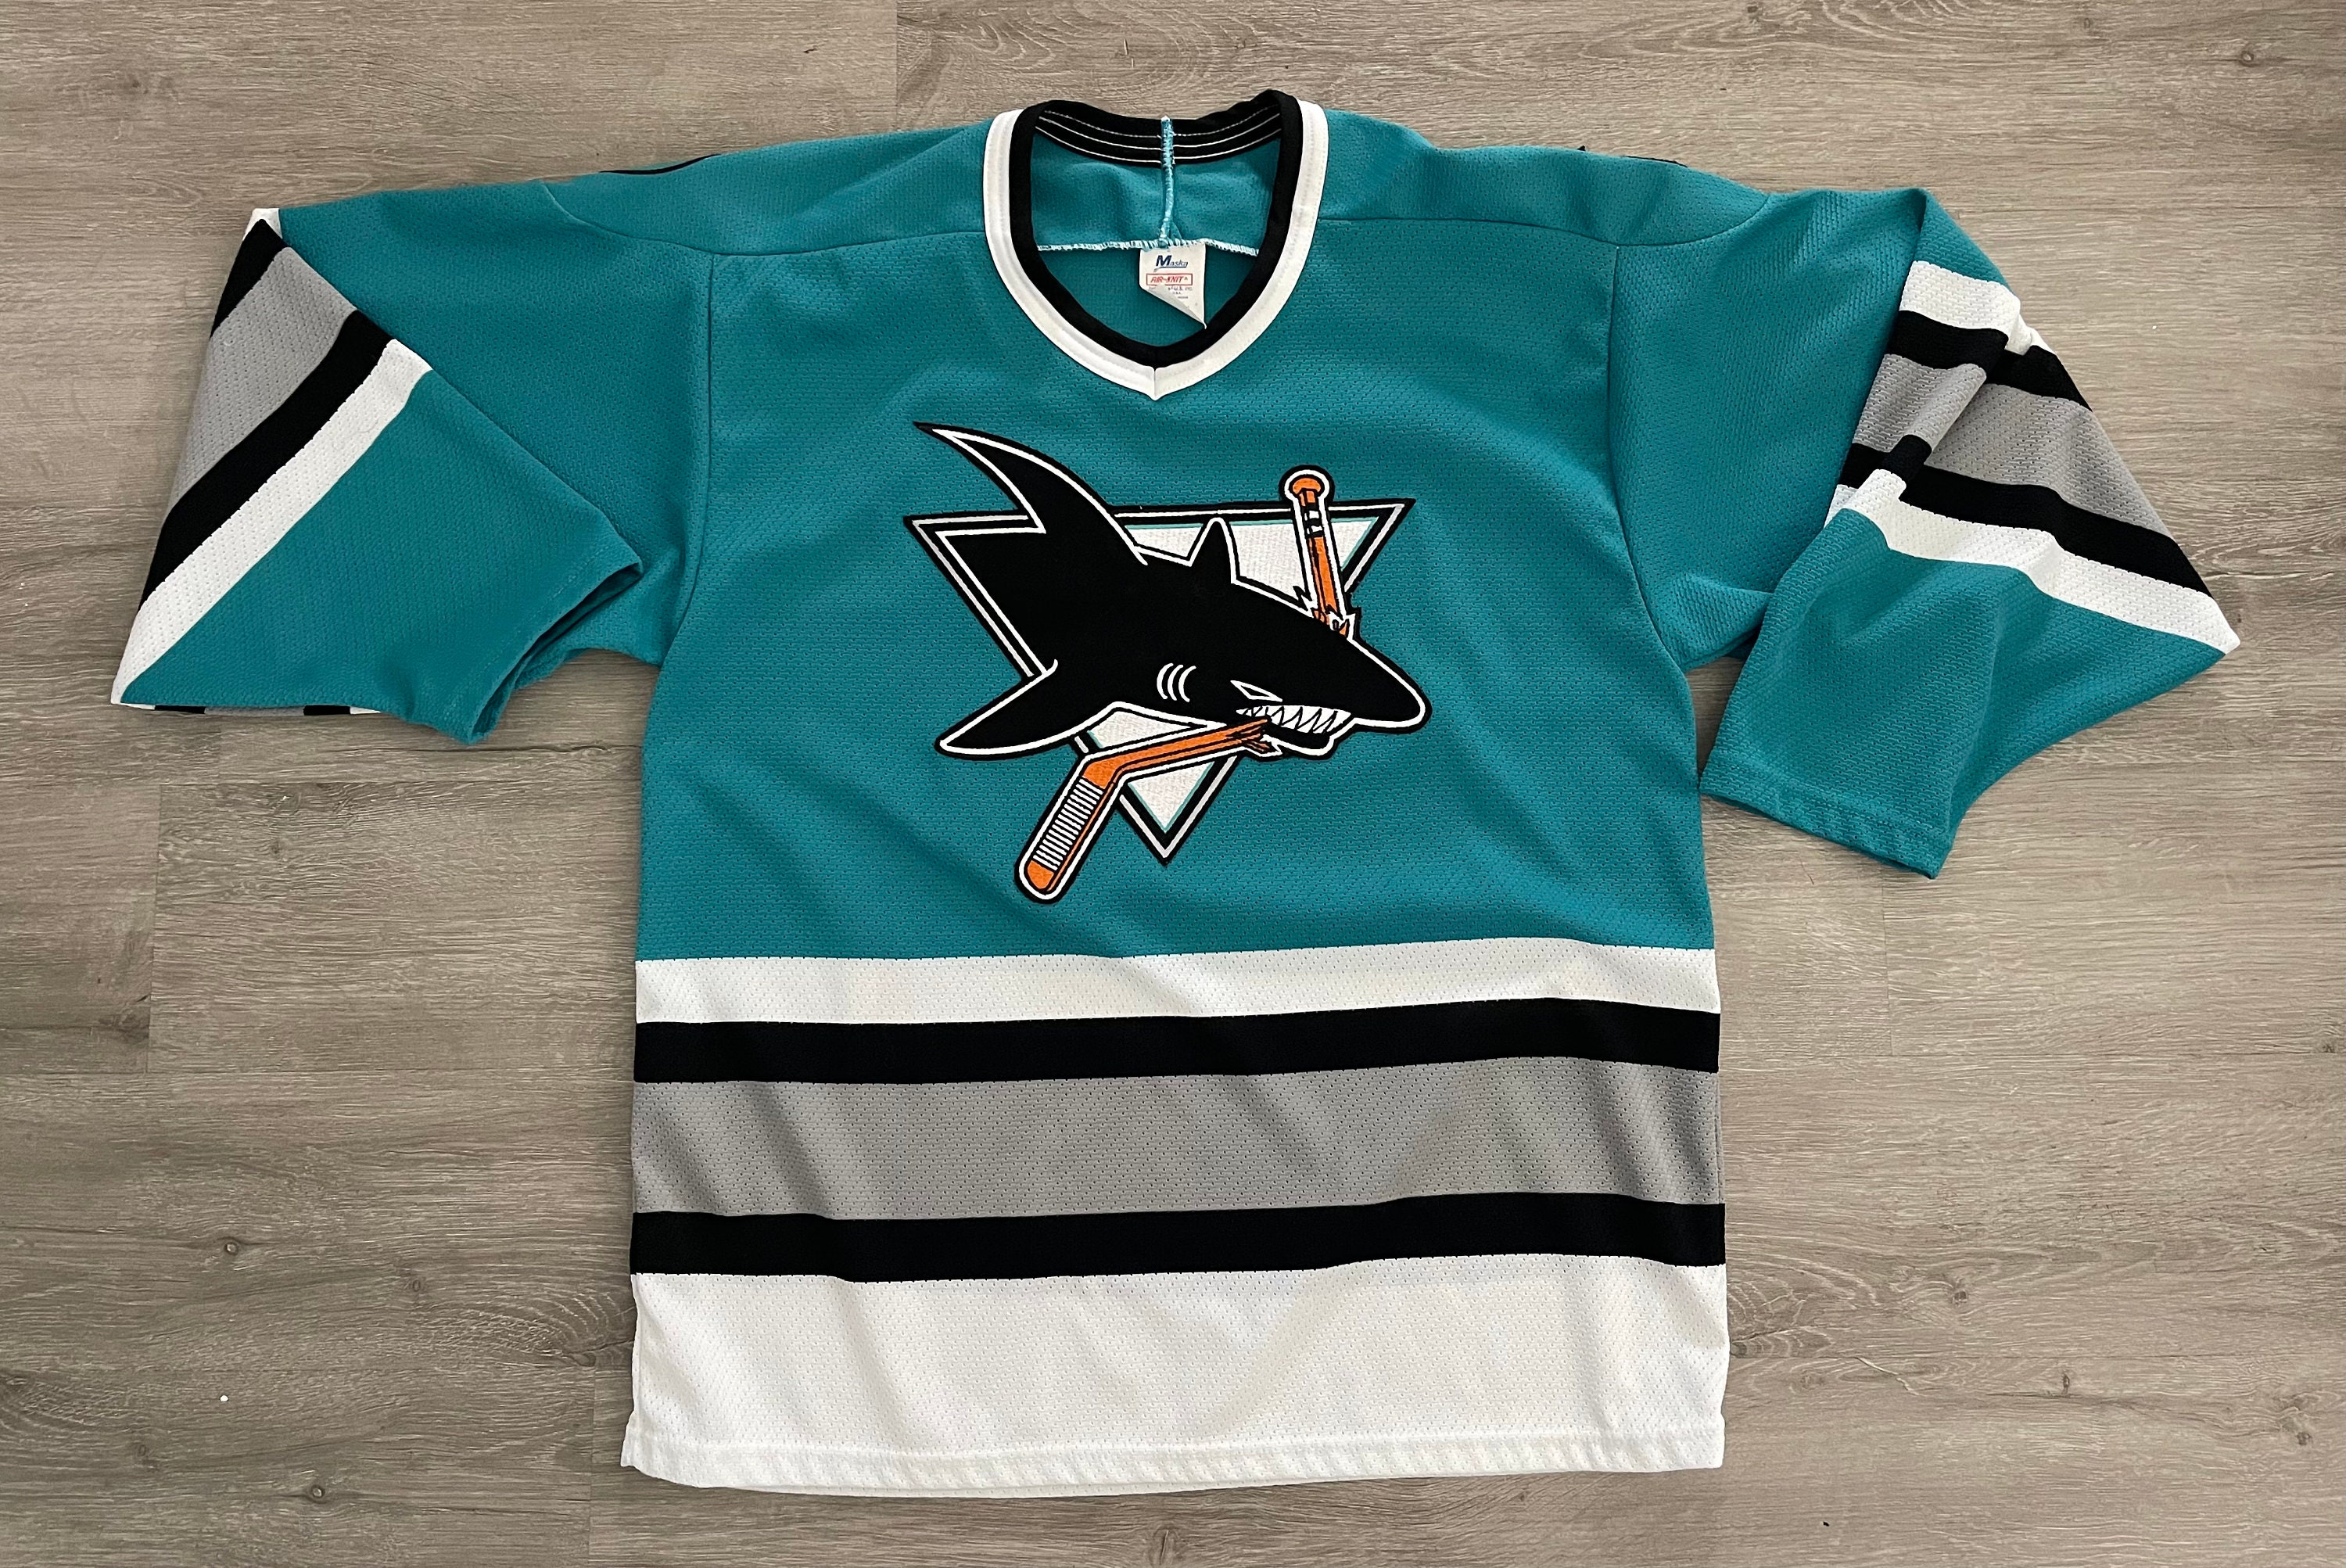 Vintage San Jose Sharks T-Shirt 3D Cheap Value Gift - Personalized Gifts:  Family, Sports, Occasions, Trending